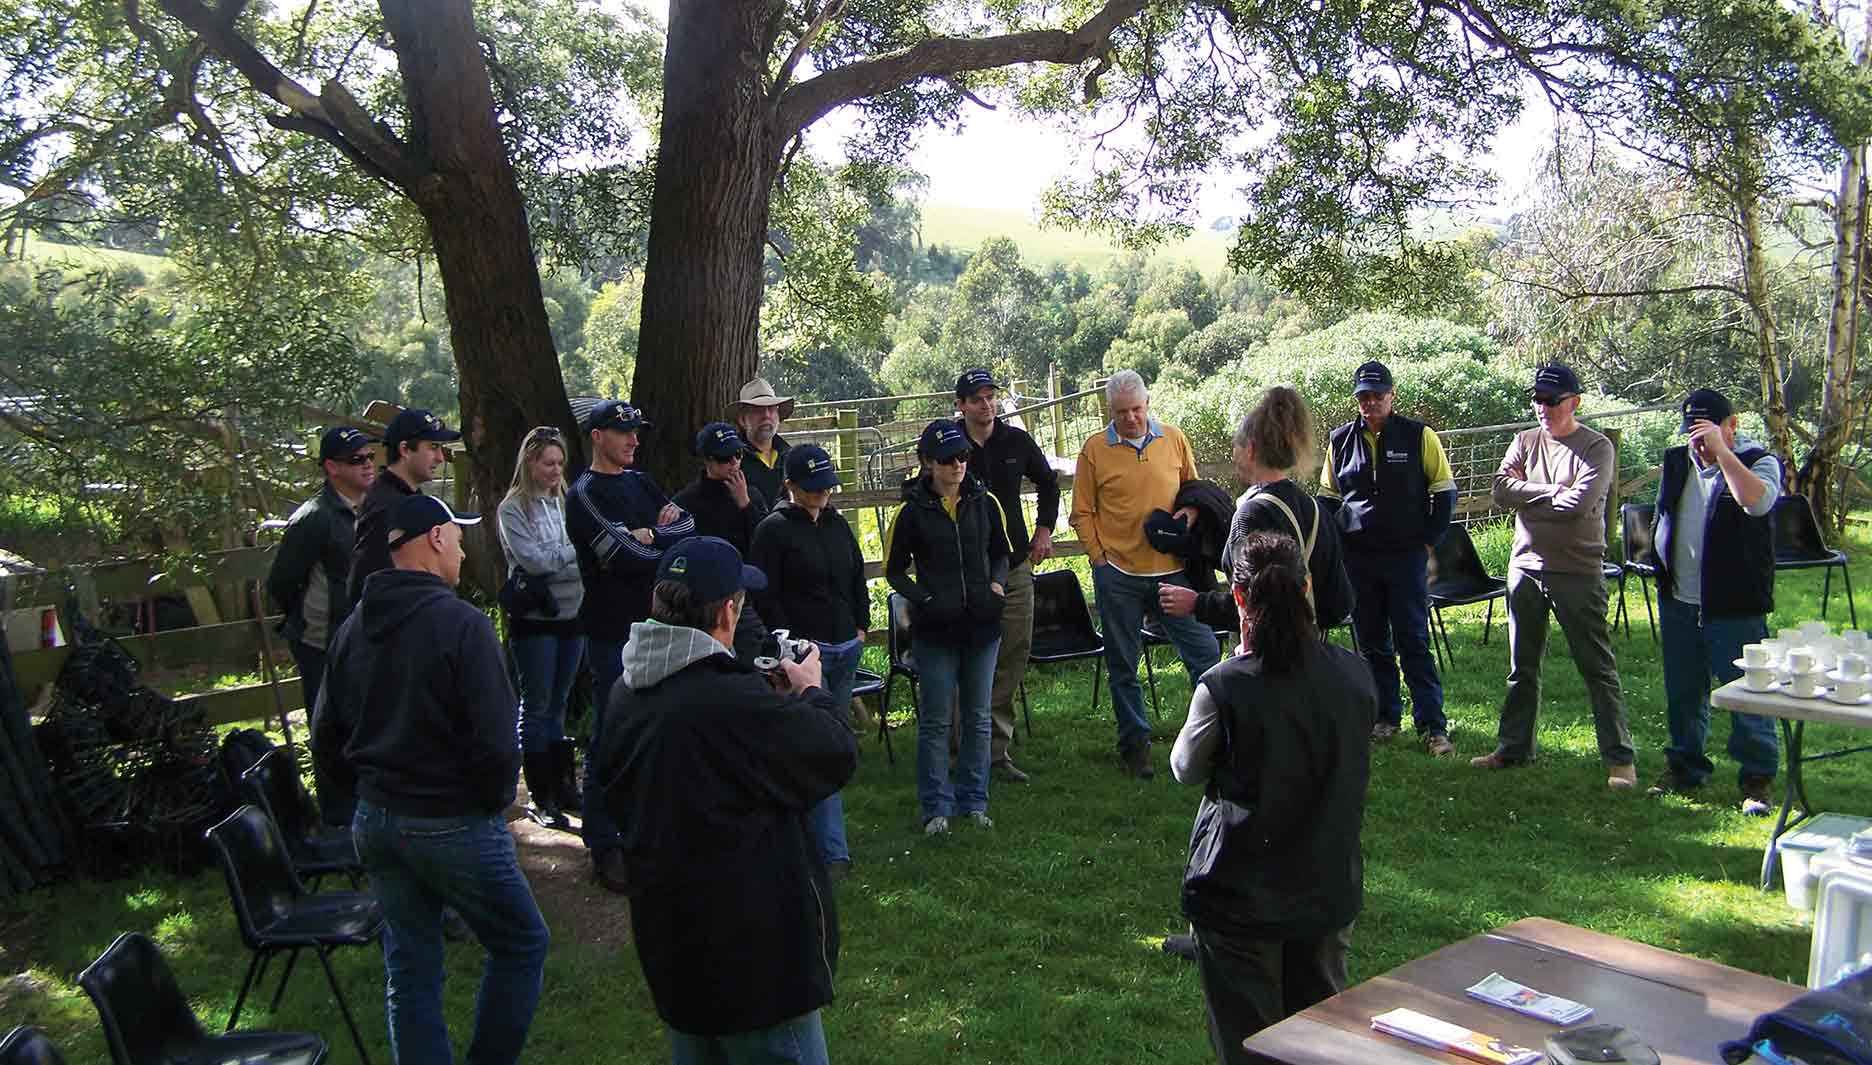 A corporate group get ready for an integrated pest management planting activity at Paul Speirs' property.